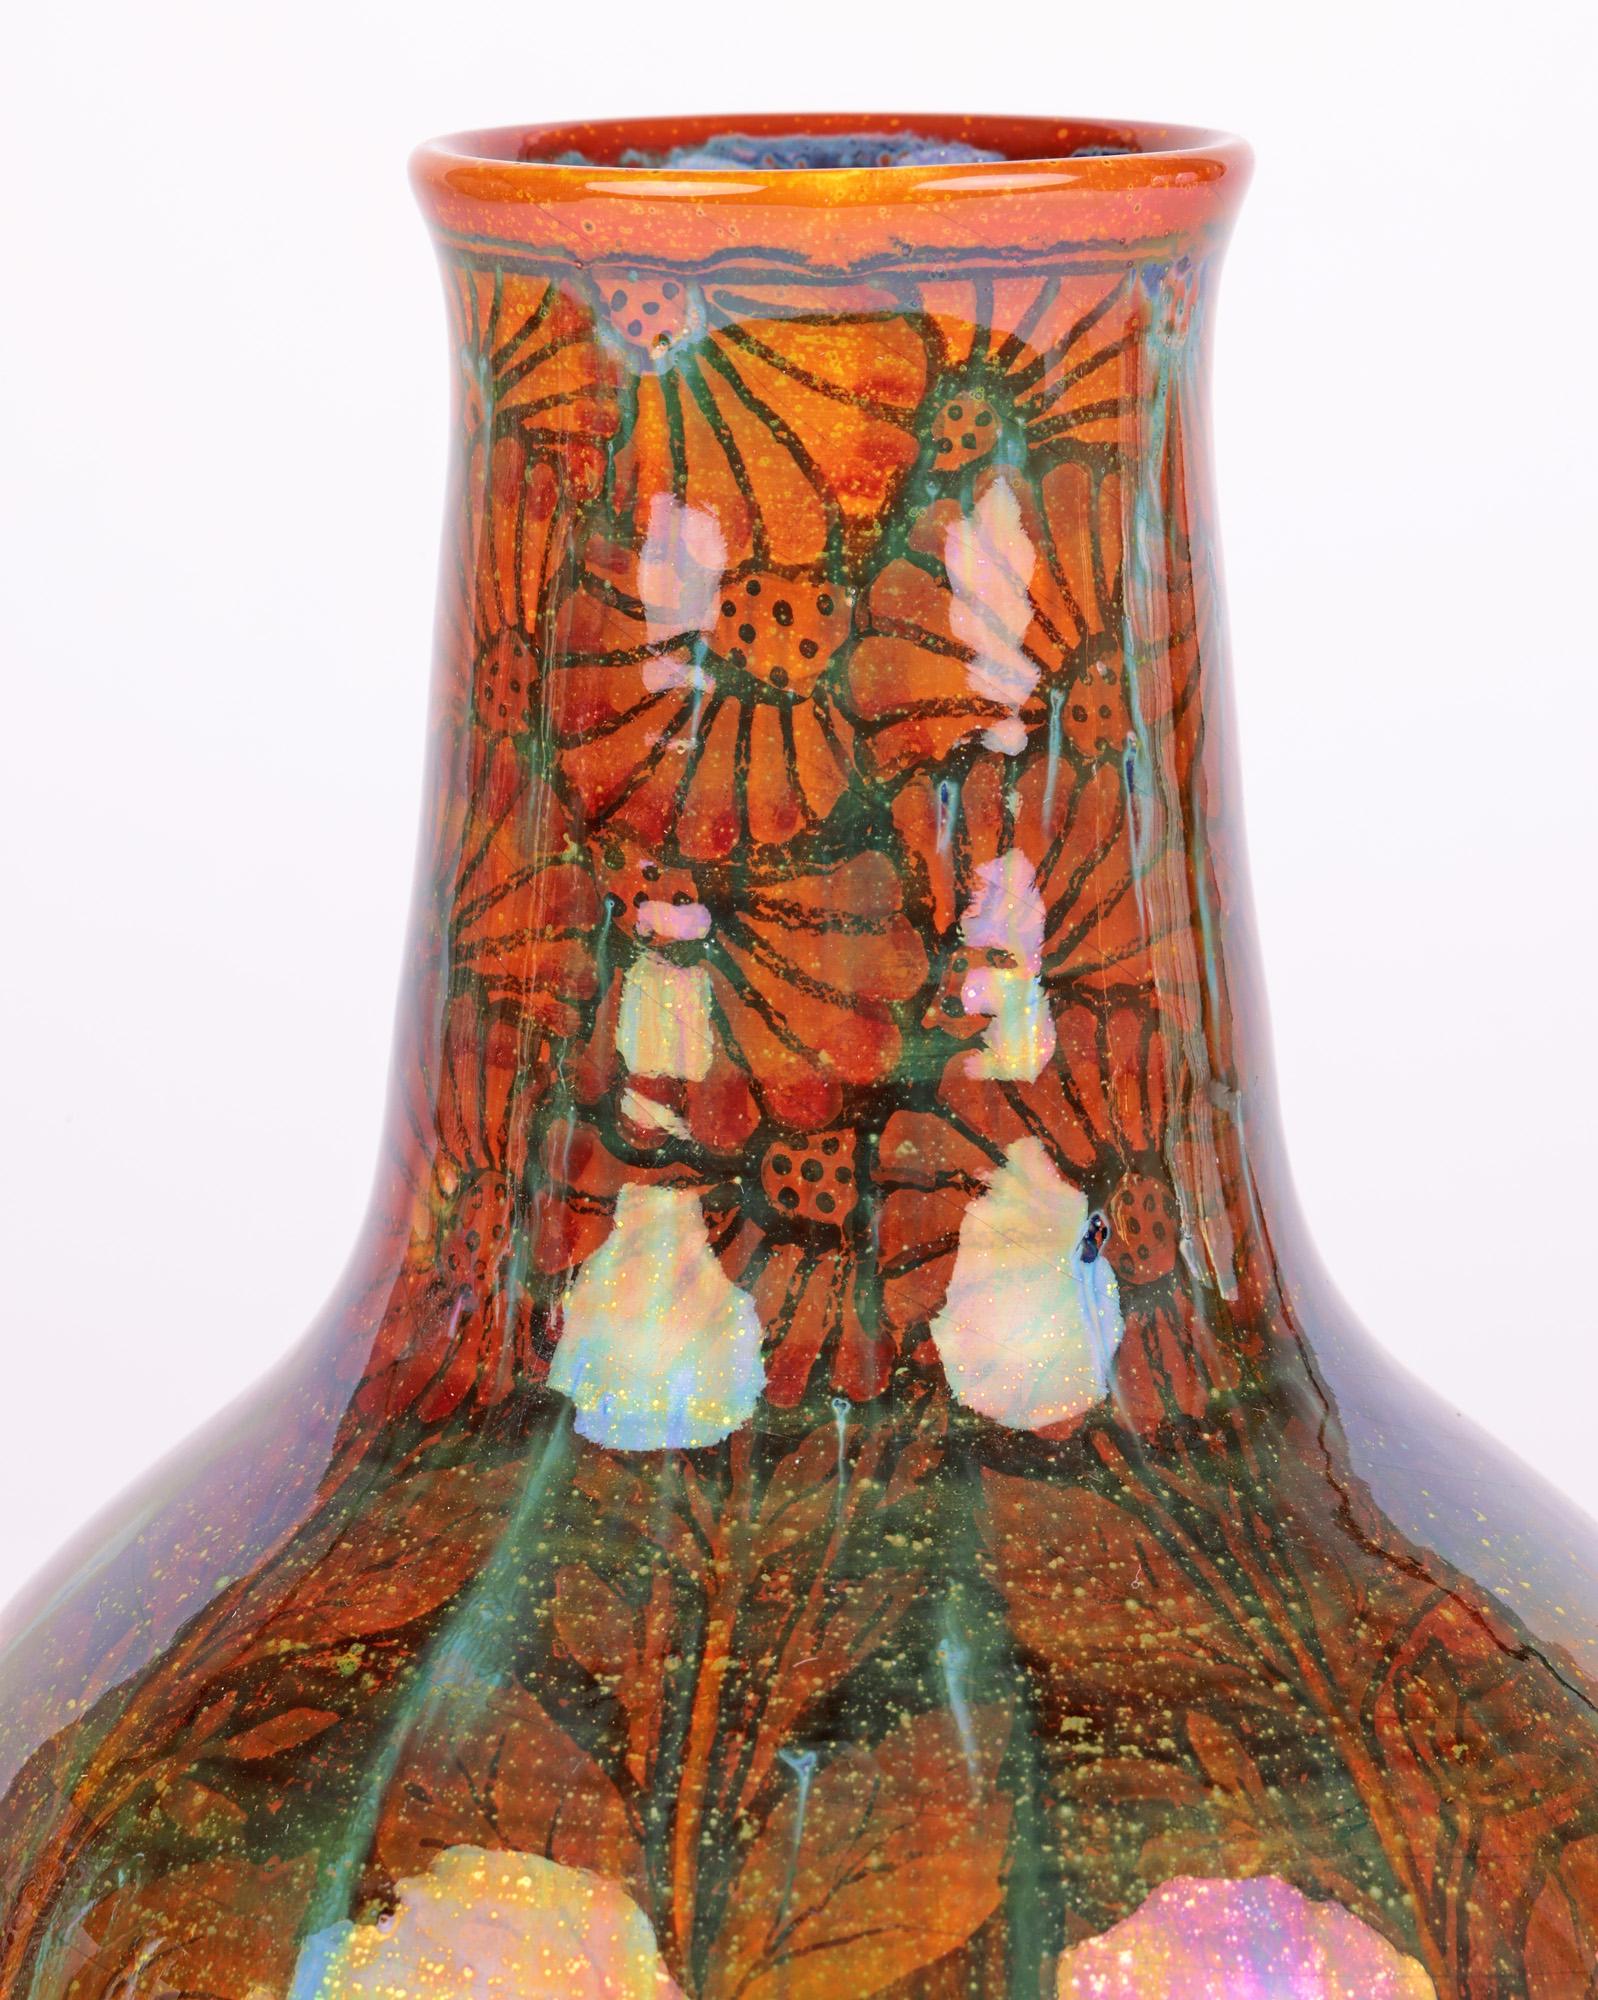 A stylish Pilkingtons Royal Lancastrian art pottery lustre vase decorated with flowering shrubs by renowned artist William S Mycock (British, 1872-1950) dating from around 1915. The finely potted bottle shaped vase stands on a wide round unglazed